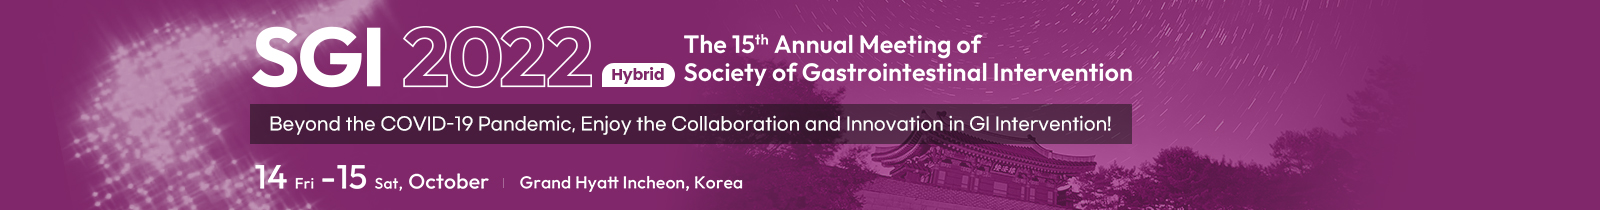 SGI 2022 The 11th Annual Meeting of Society of Gastrointestinal Intervention